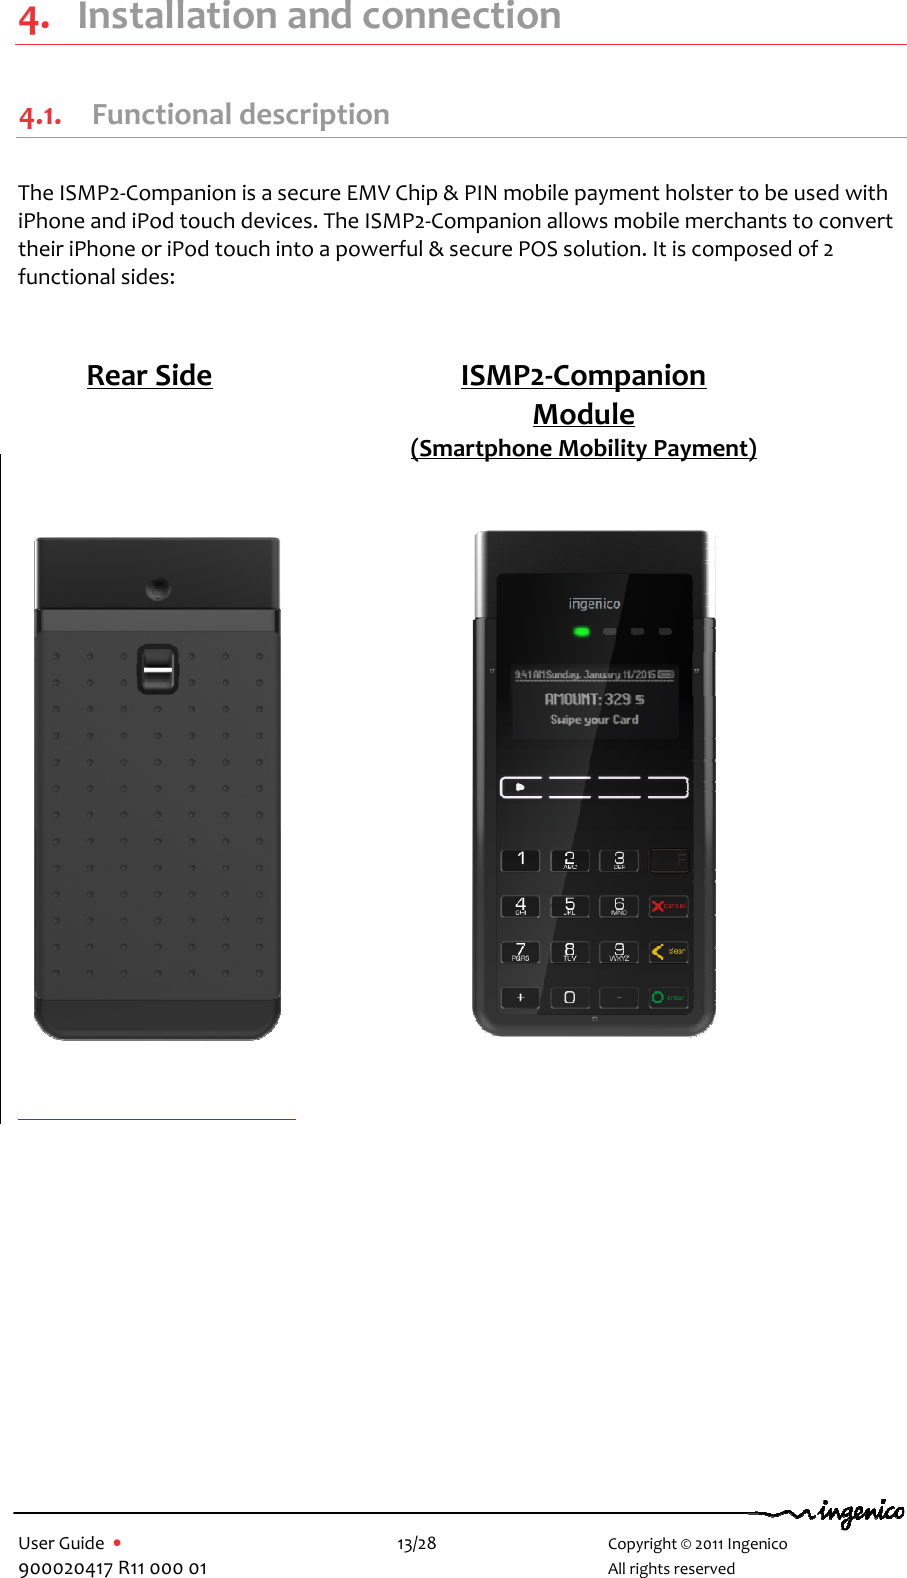   User Guide  •    13/28       Copyright © 2011 Ingenico 900020417 R11 000 01       All rights reserved   4. Installation and connection 4.1. Functional description  The ISMP2-Companion is a secure EMV Chip &amp; PIN mobile payment holster to be used with iPhone and iPod touch devices. The ISMP2-Companion allows mobile merchants to convert their iPhone or iPod touch into a powerful &amp; secure POS solution. It is composed of 2 functional sides:                                      Rear Side  ISMP2-Companion Module (Smartphone Mobility Payment)  